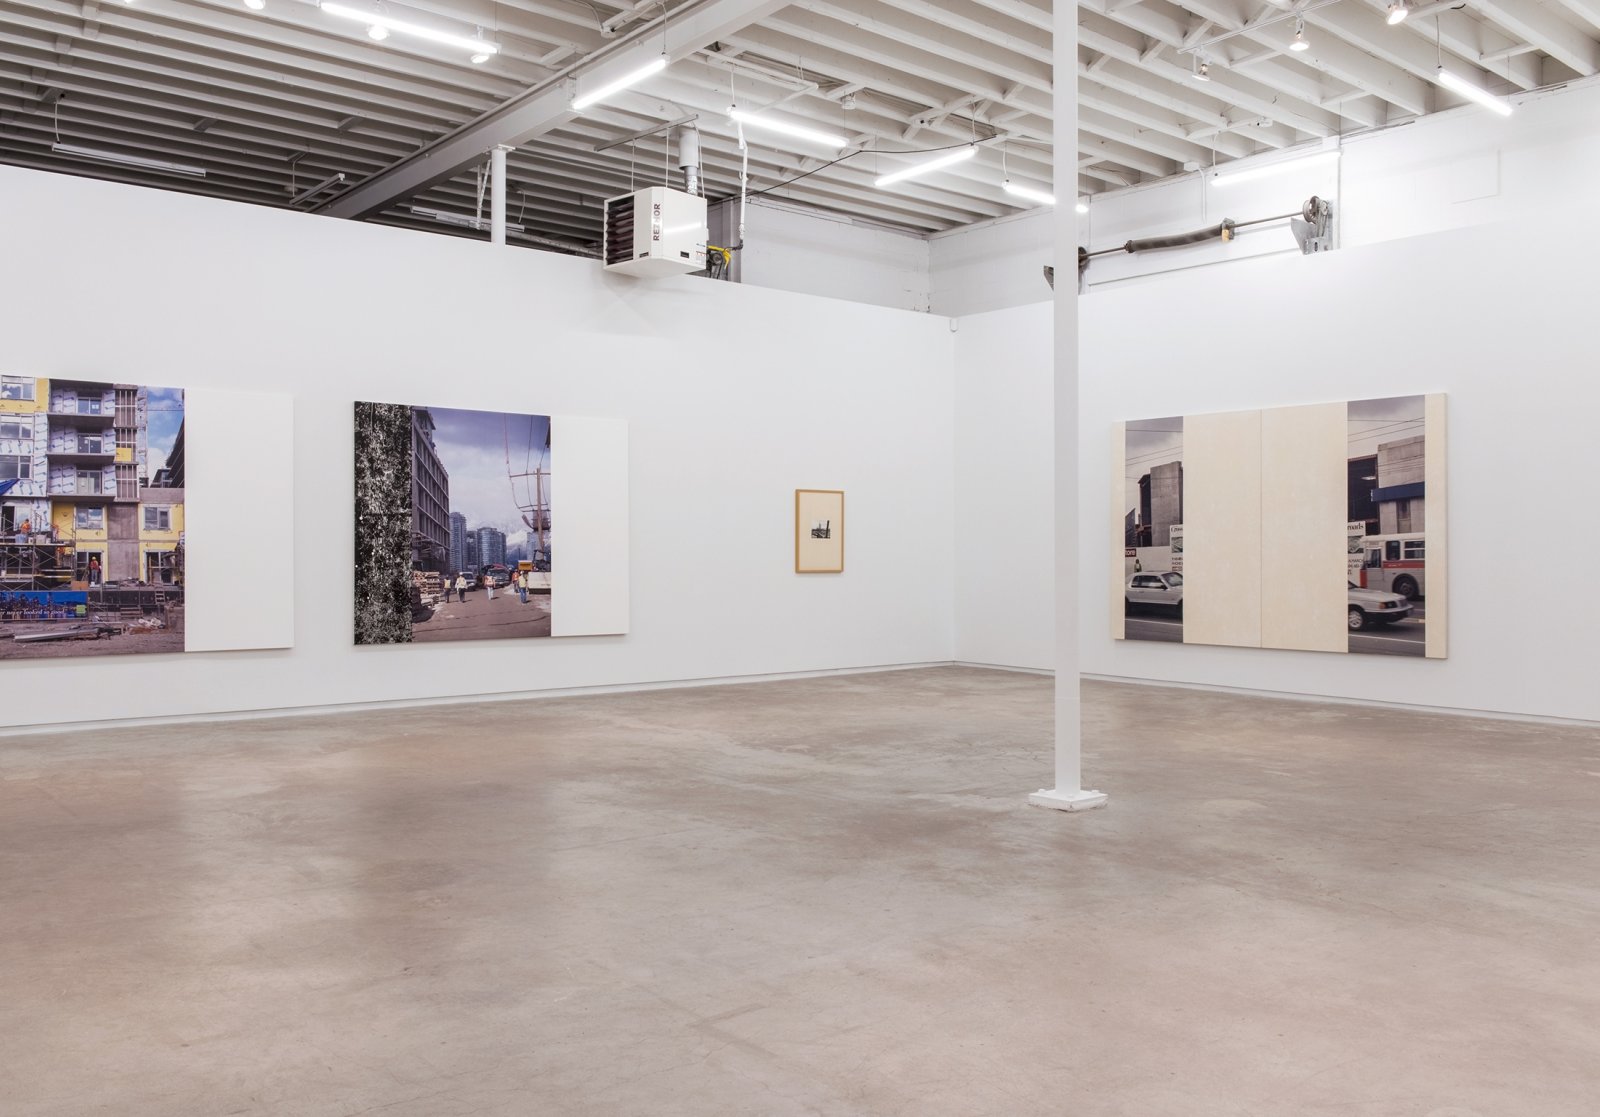 Ian Wallace, installation view, The Construction Site, Catriona Jeffries, 2015​​ by Ian Wallace